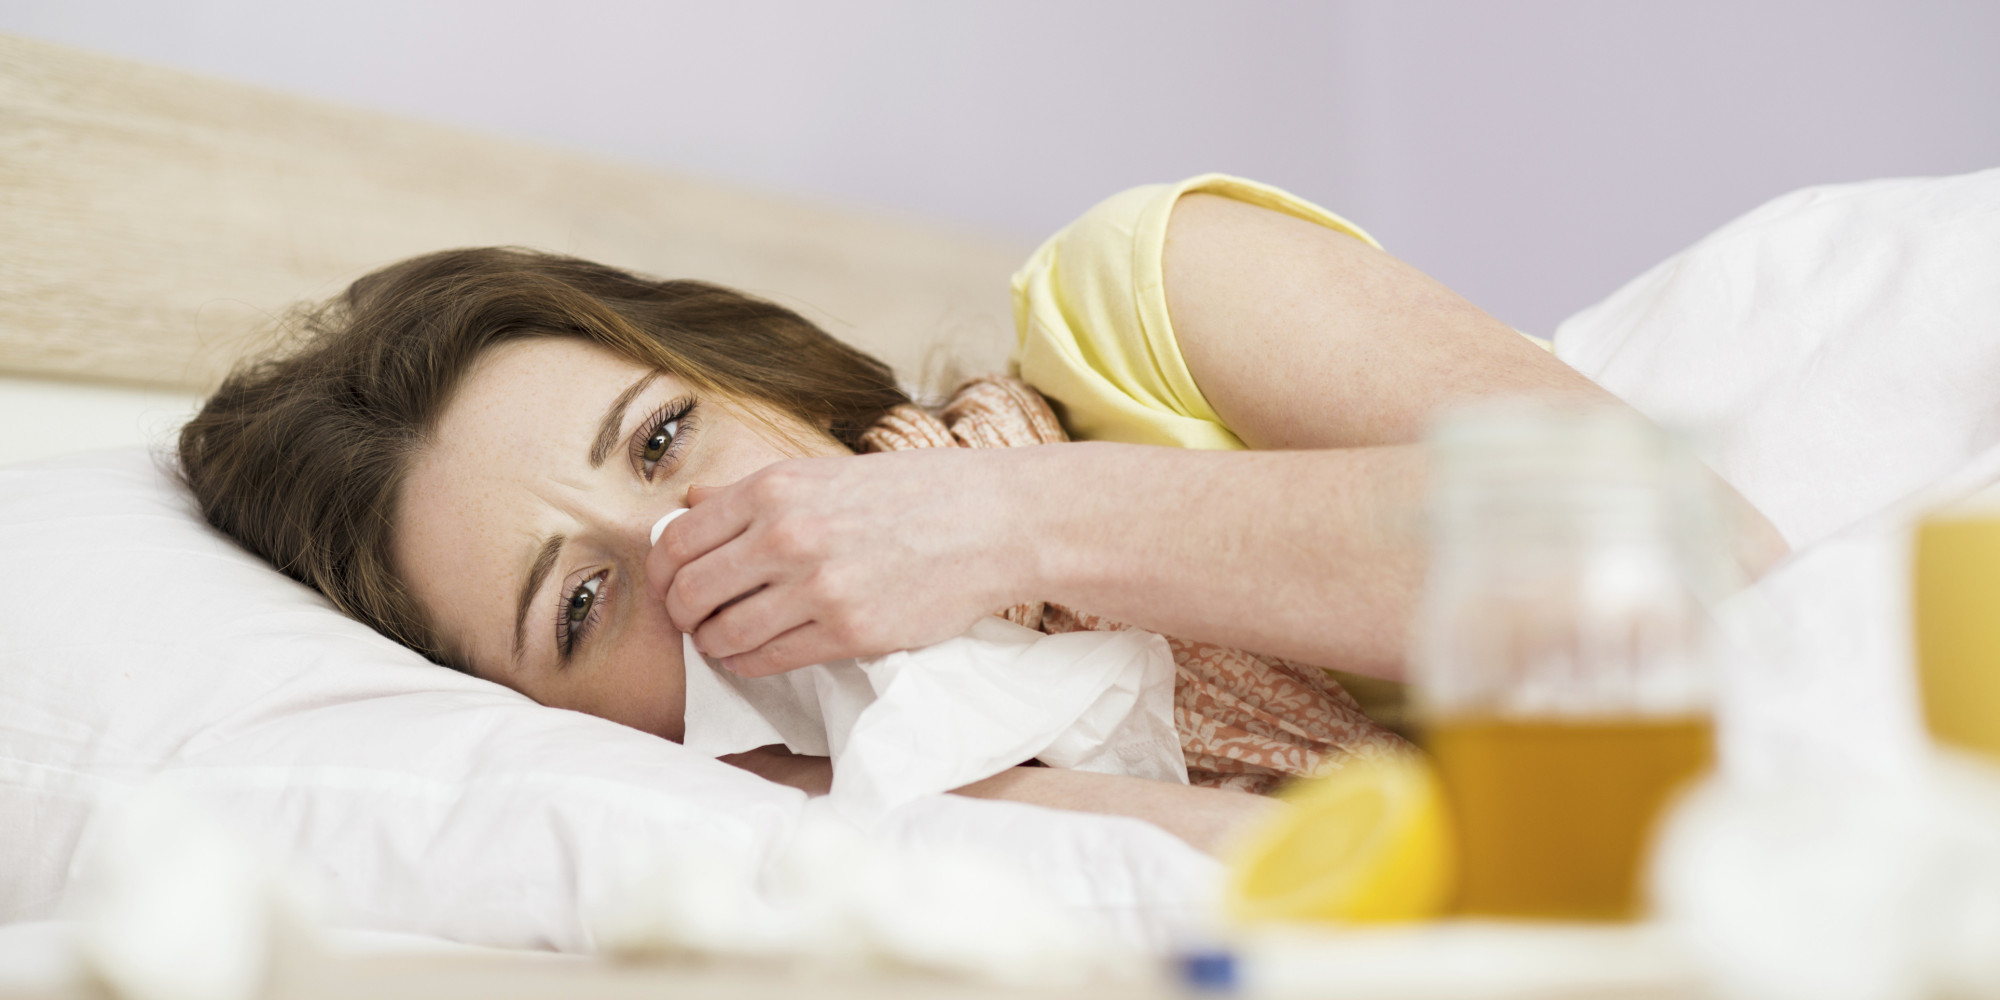 http://i.huffpost.com/gen/2468010/images/o-WOMAN-SICK-IN-BED-facebook.jpg